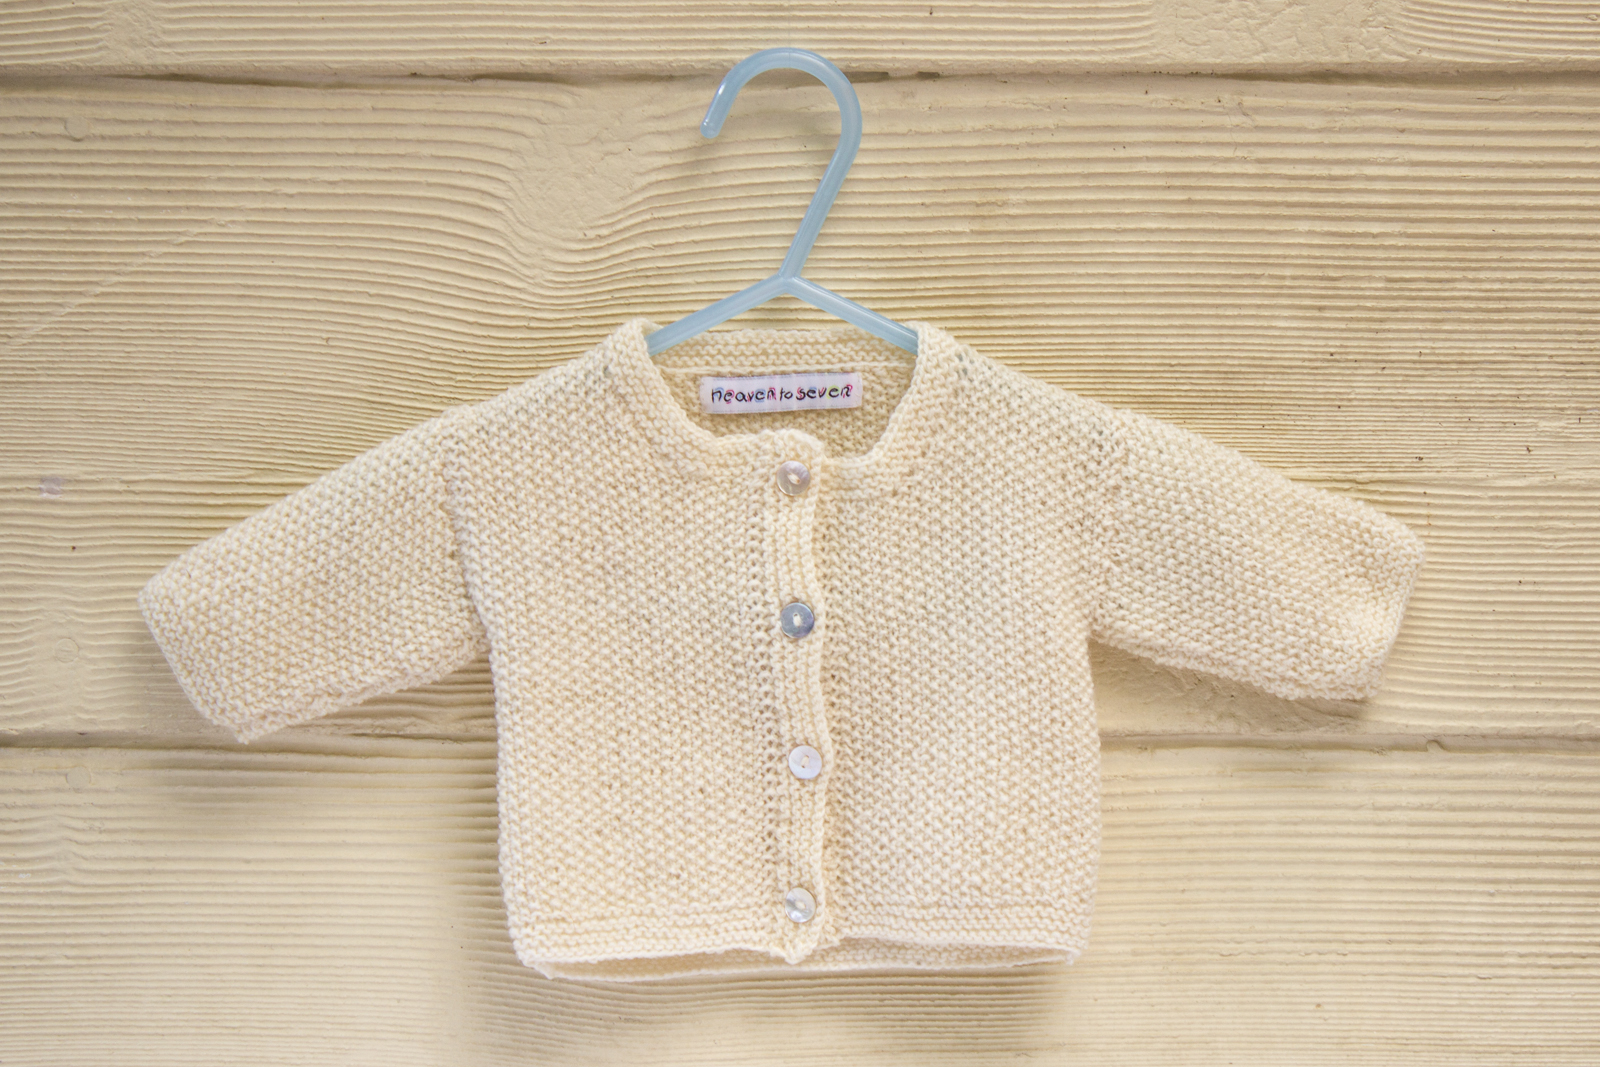 Knitting Pattern Baby Sweater Knitting Pattern Ba Cardigan With Button Closure Essential Classic Moss Stitch In 4 Sizes